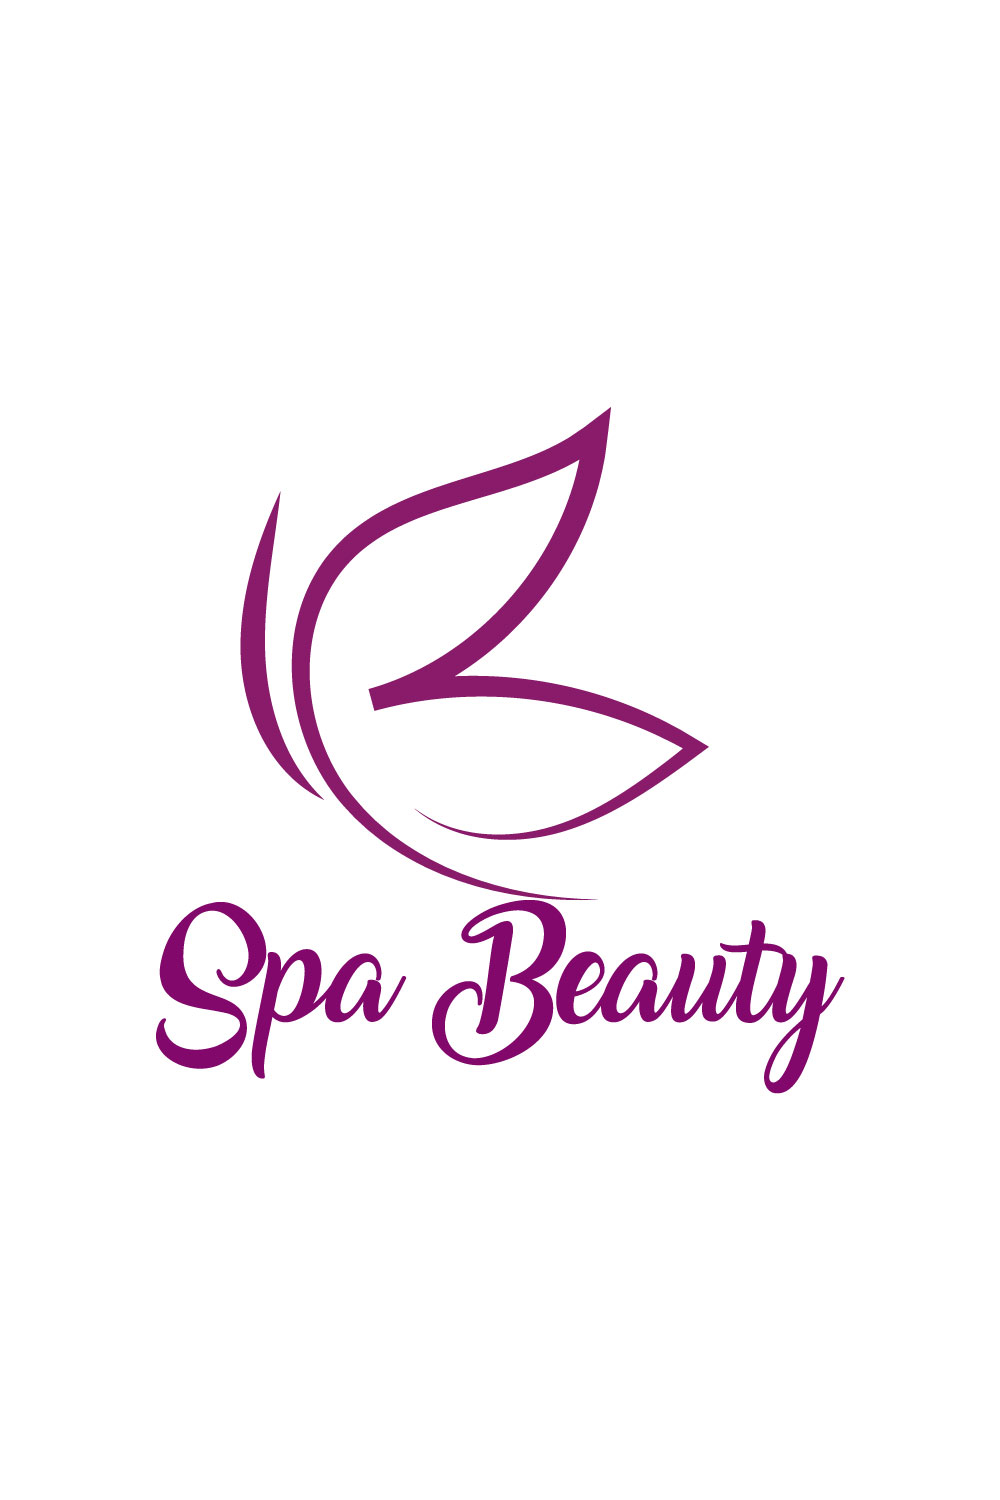 Free skin's beauty potential logo pinterest preview image.